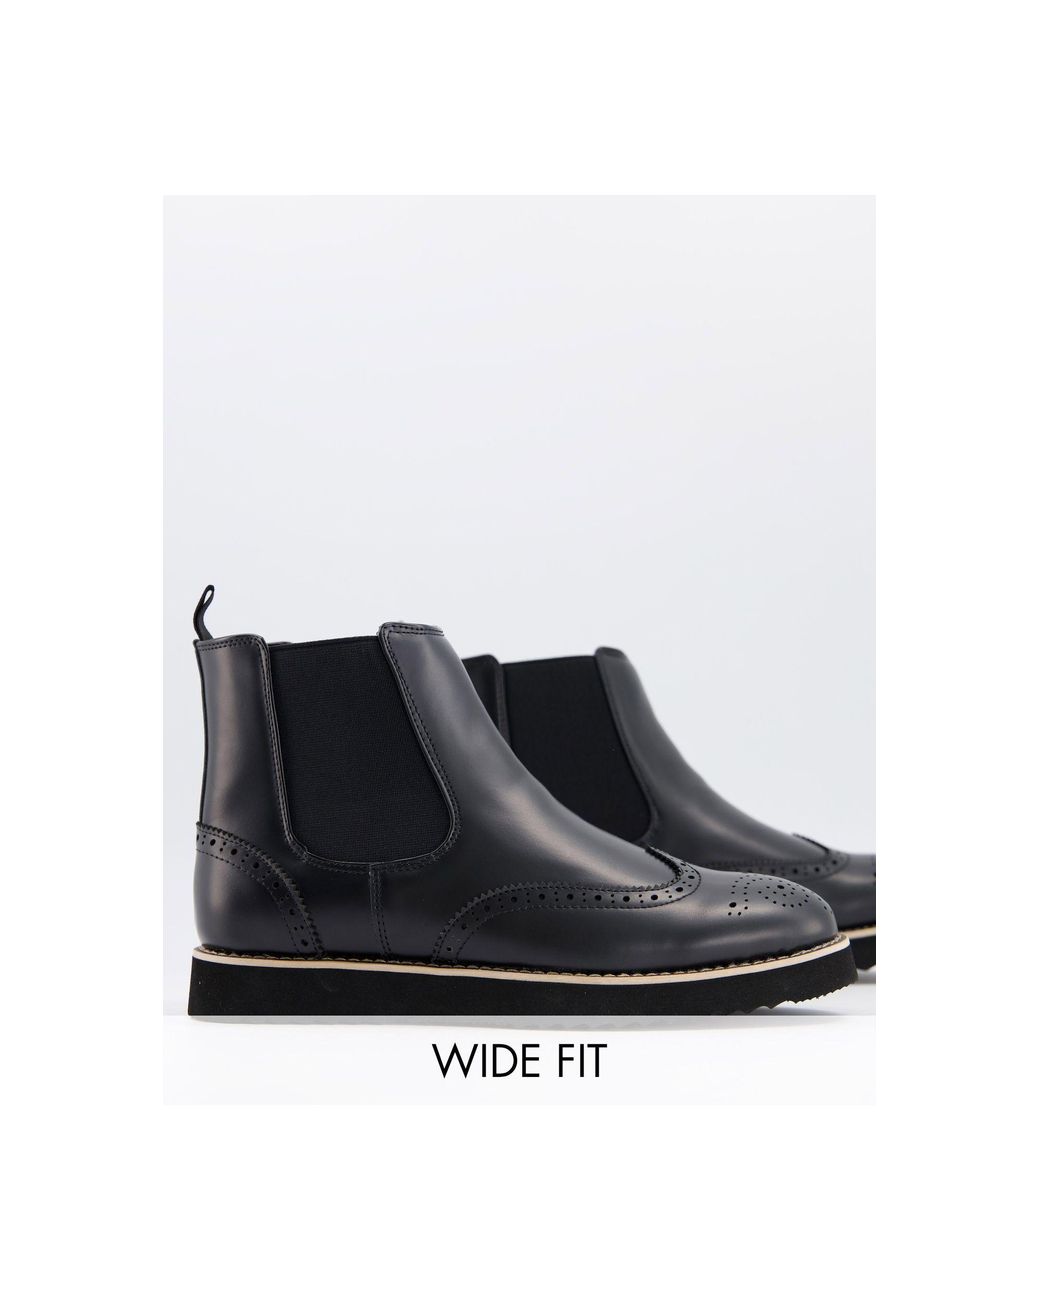 Truffle Collection Wide Fit Casual Chelsea Boots in Black for Men - Lyst